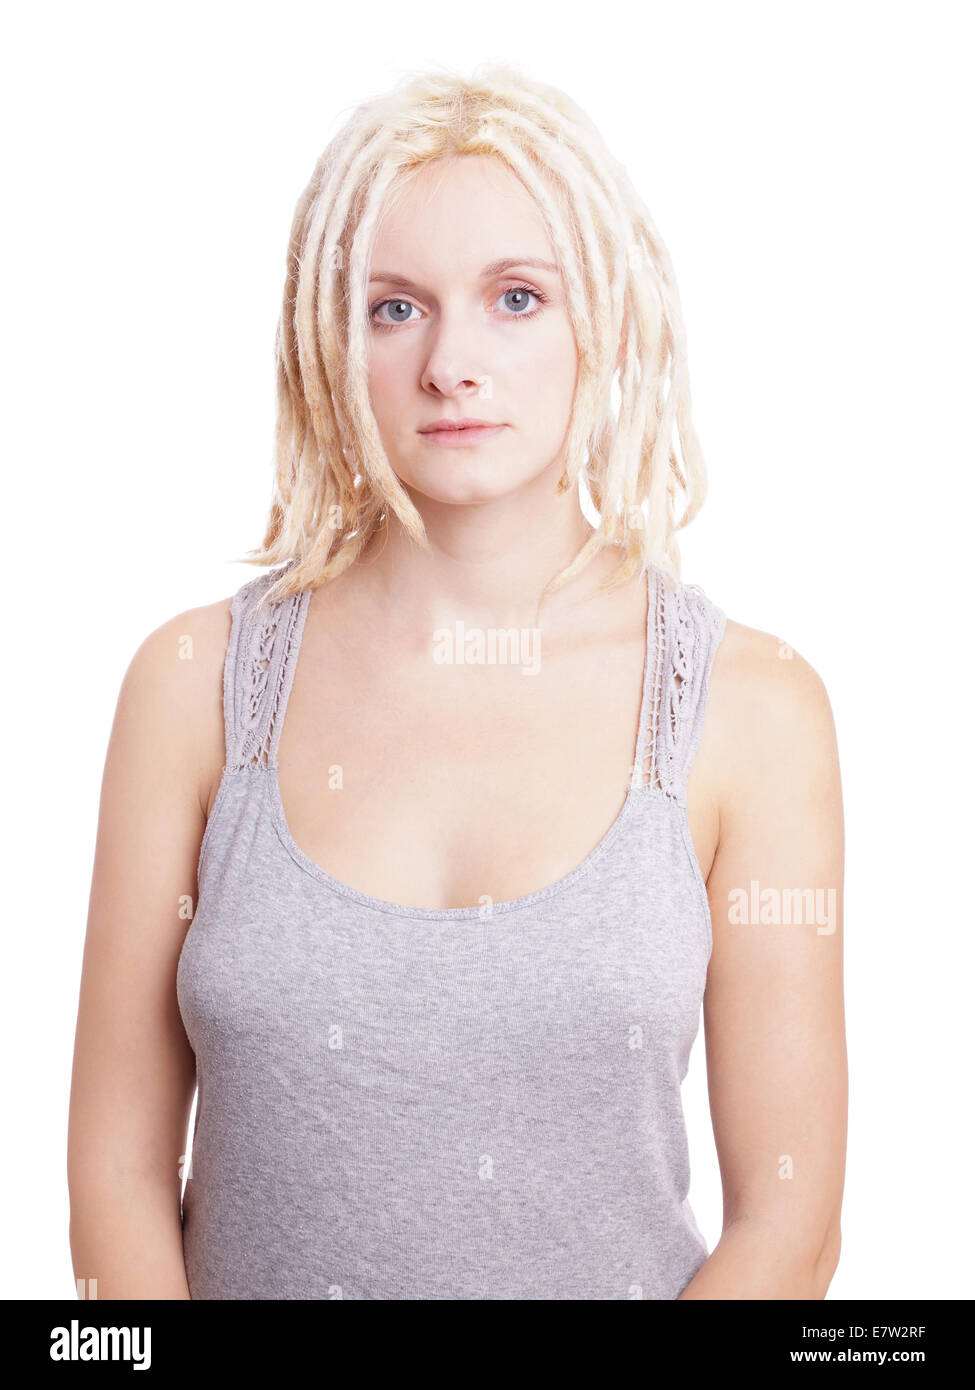 young woman with blonde dreadlocks Stock Photo